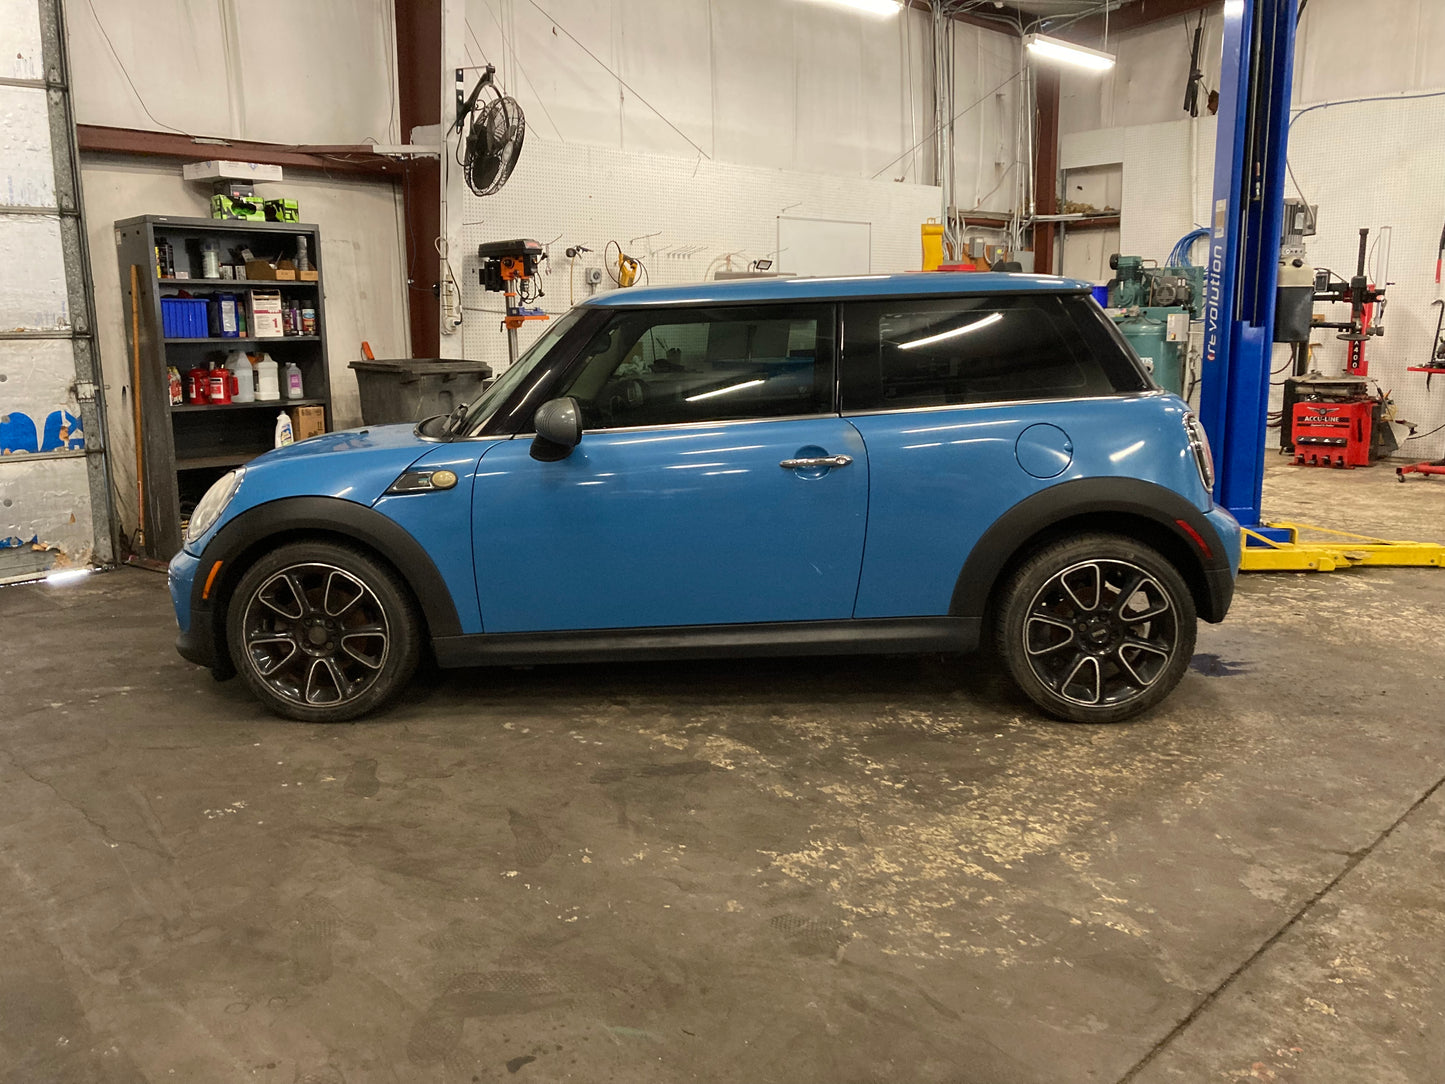 2013 MINI Cooper Bayswater Edition Base, New Parts Car (October 2023) Stk #401